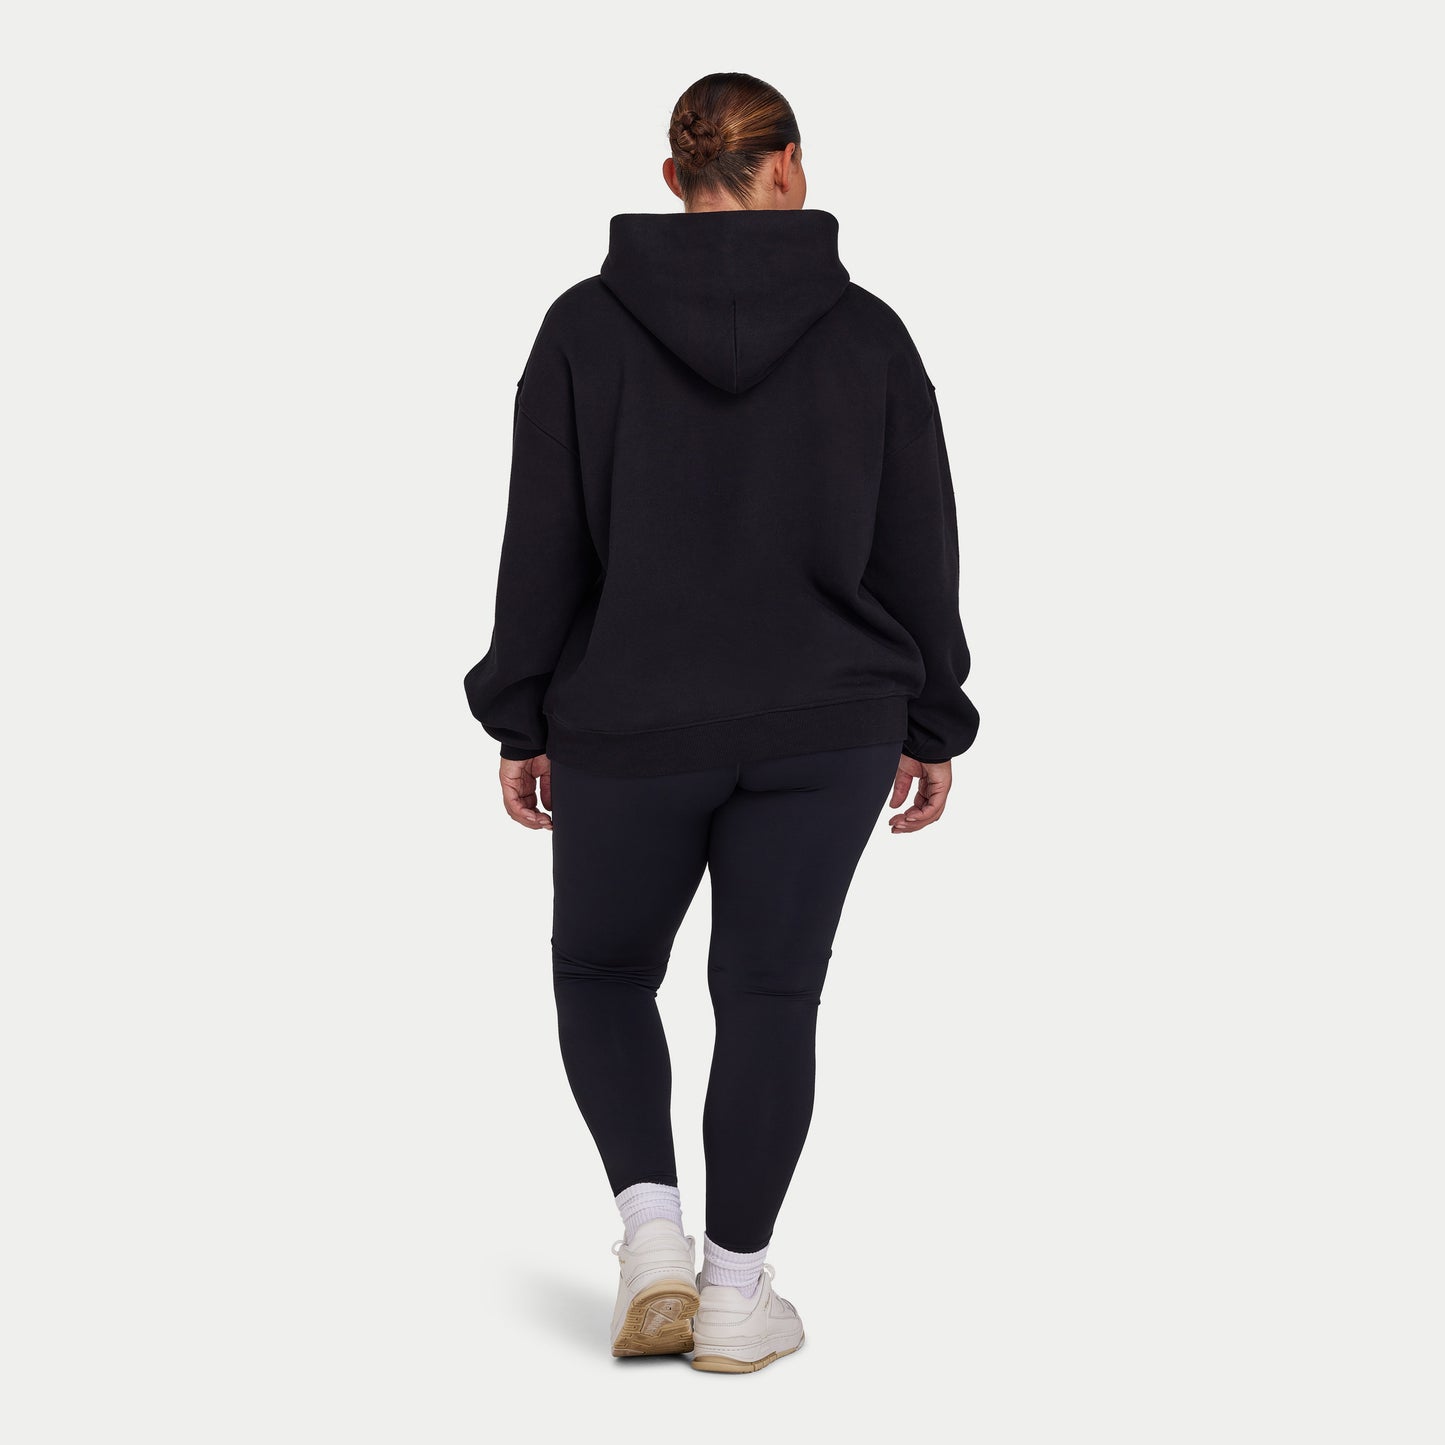 Womens Collective Hoodie - Black